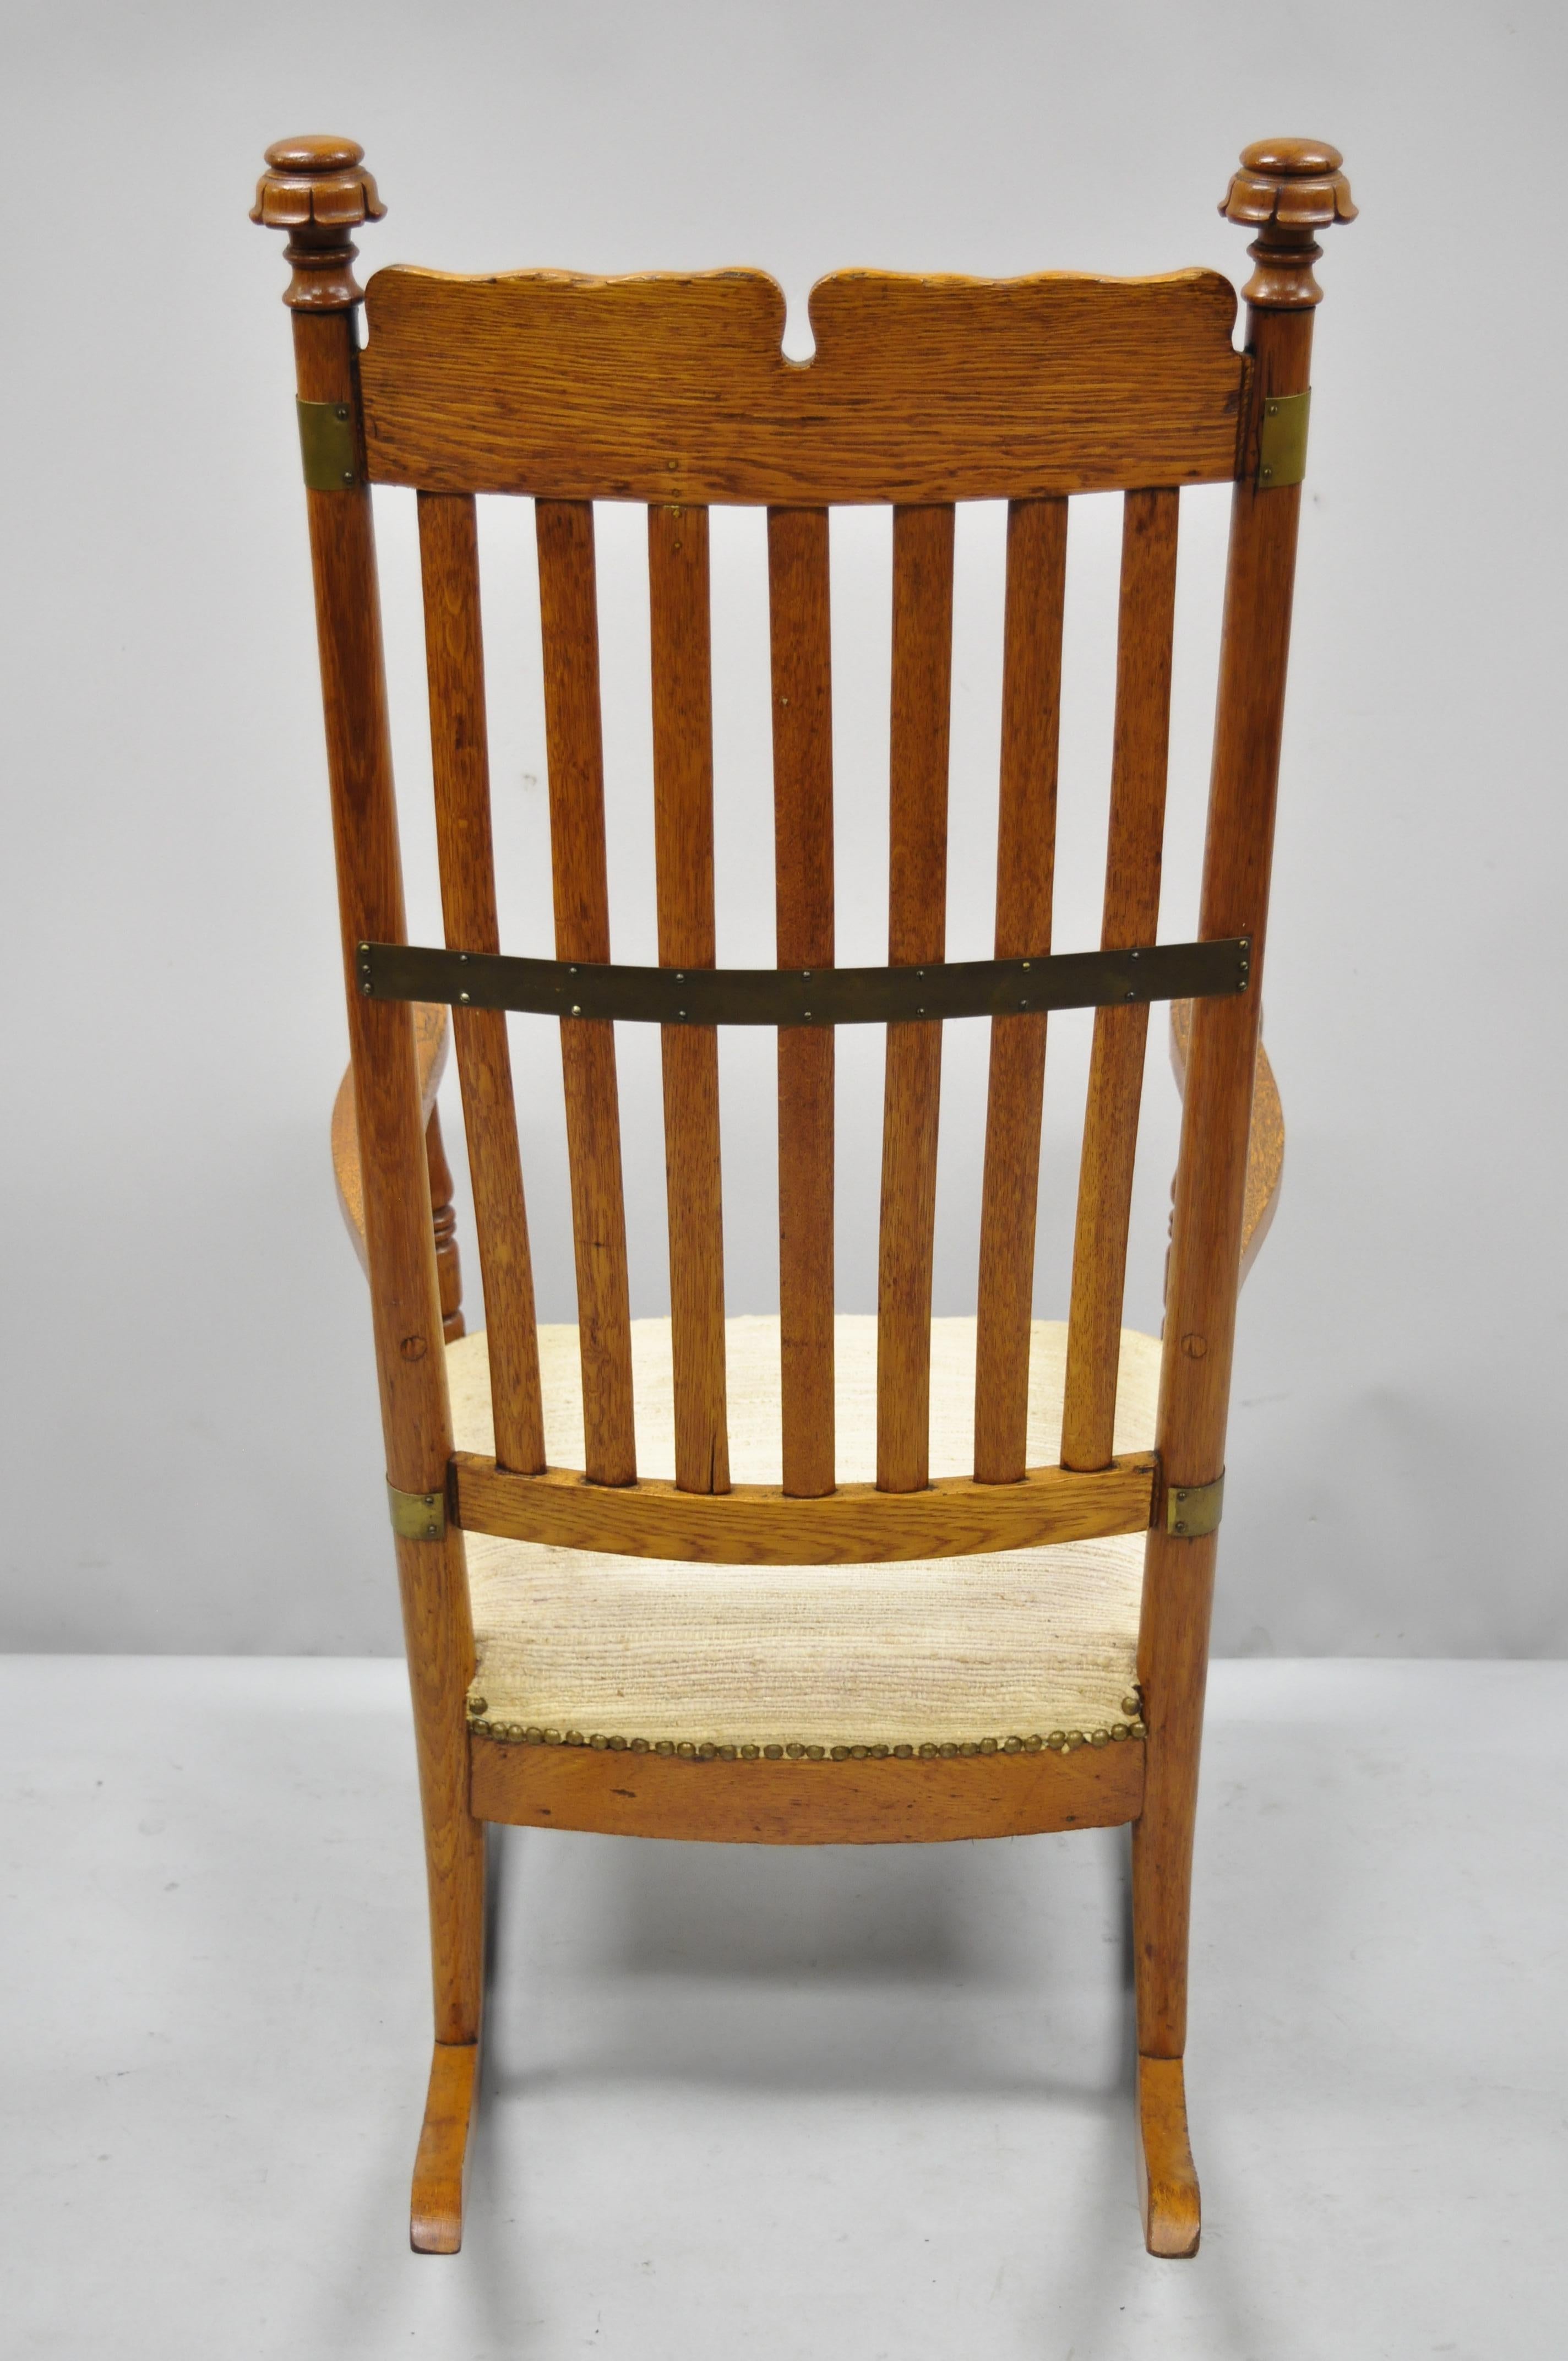 20th Century Antique Victorian Oakwood Arts & Crafts Rocker Rocking Chair w/ Brass Accents For Sale